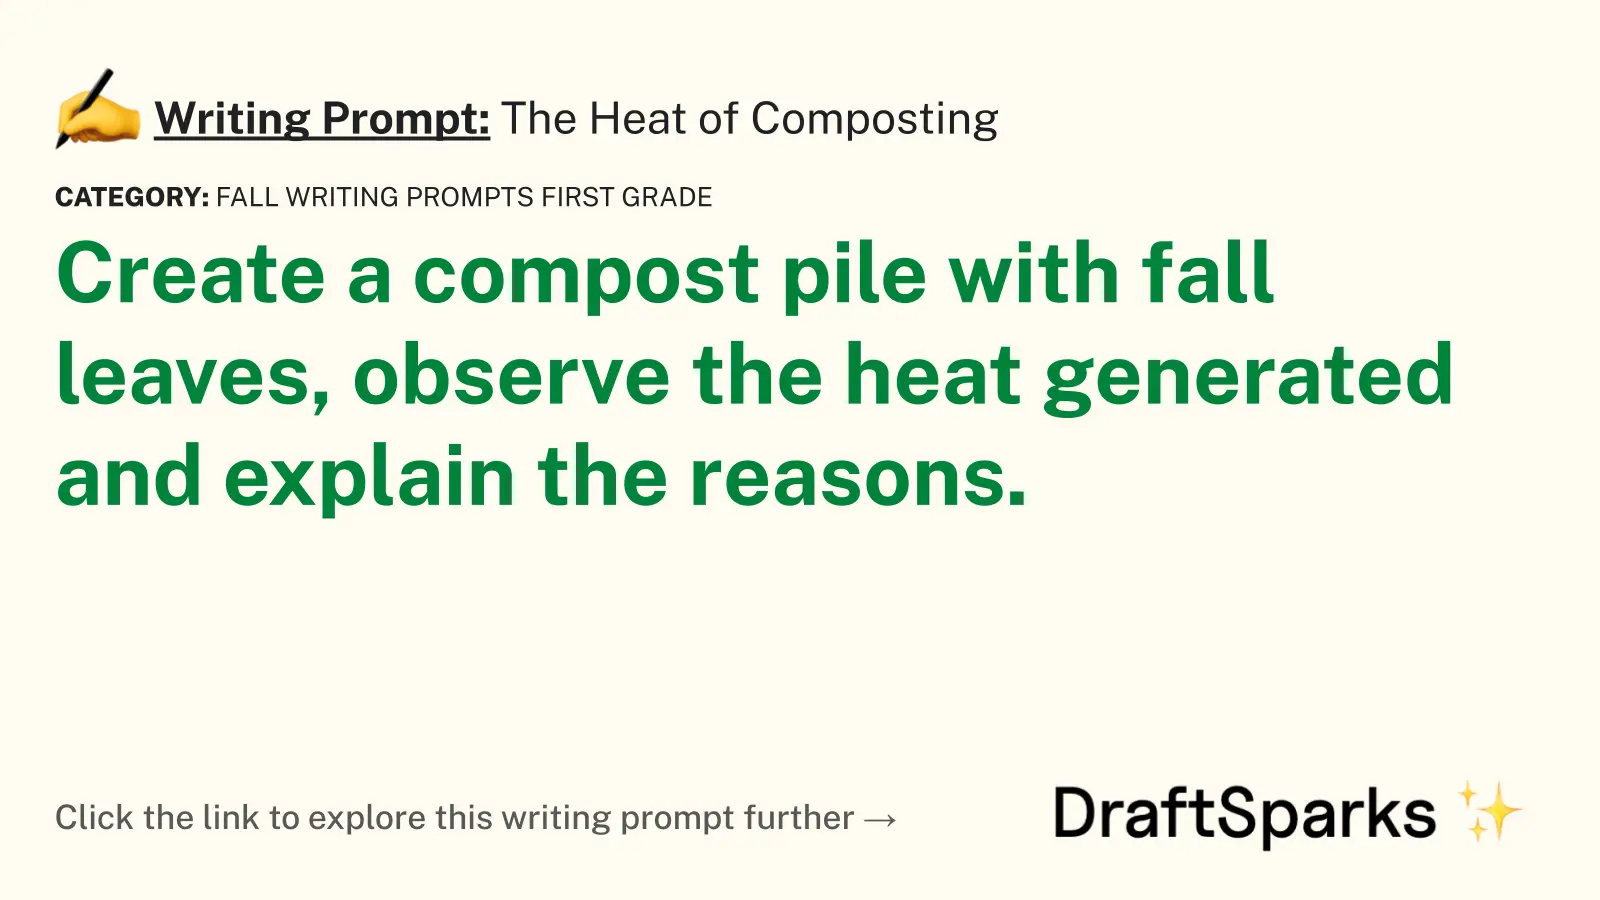 The Heat of Composting